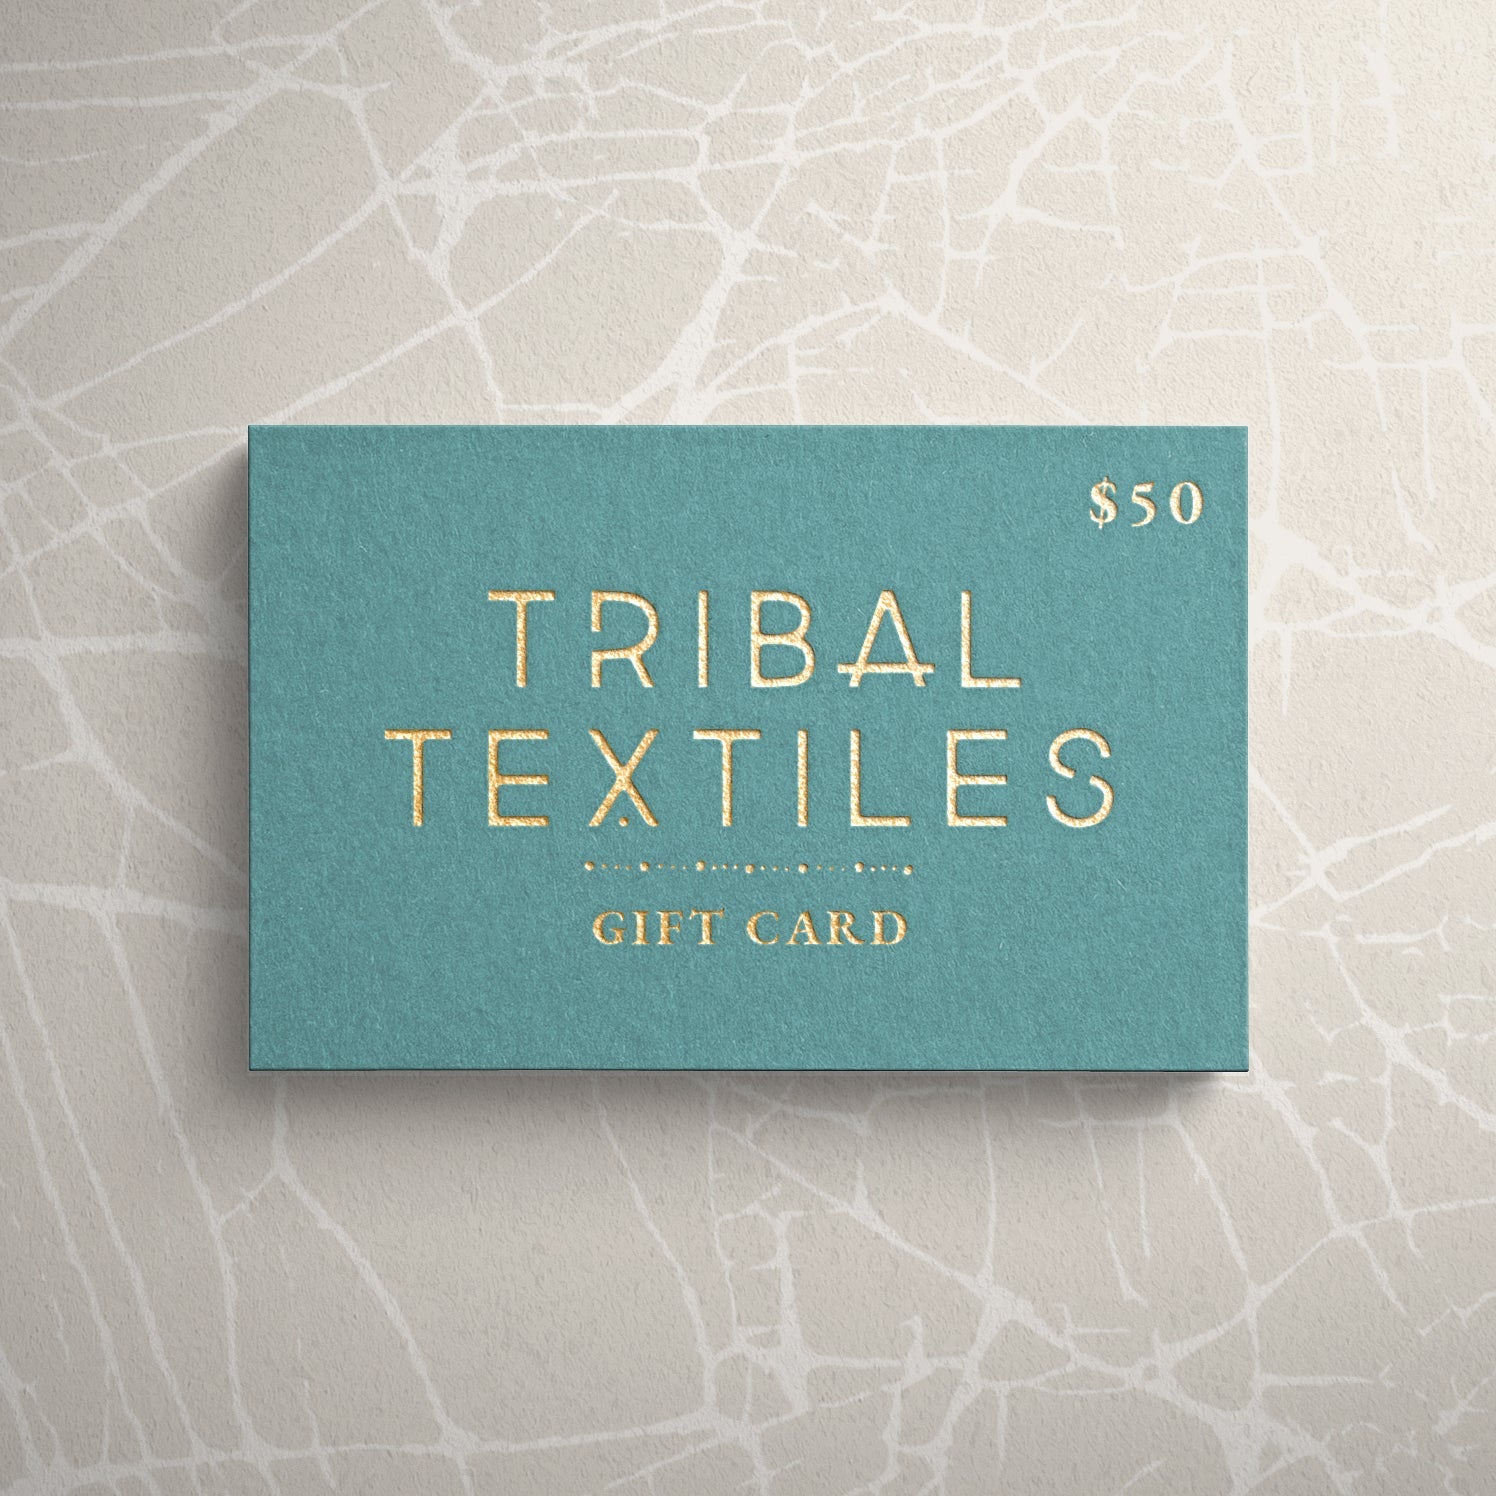 Virtual Gift Card - Gift Card by TRIBAL TEXTILES - Handcrafted Home Decor Interiors - African Made